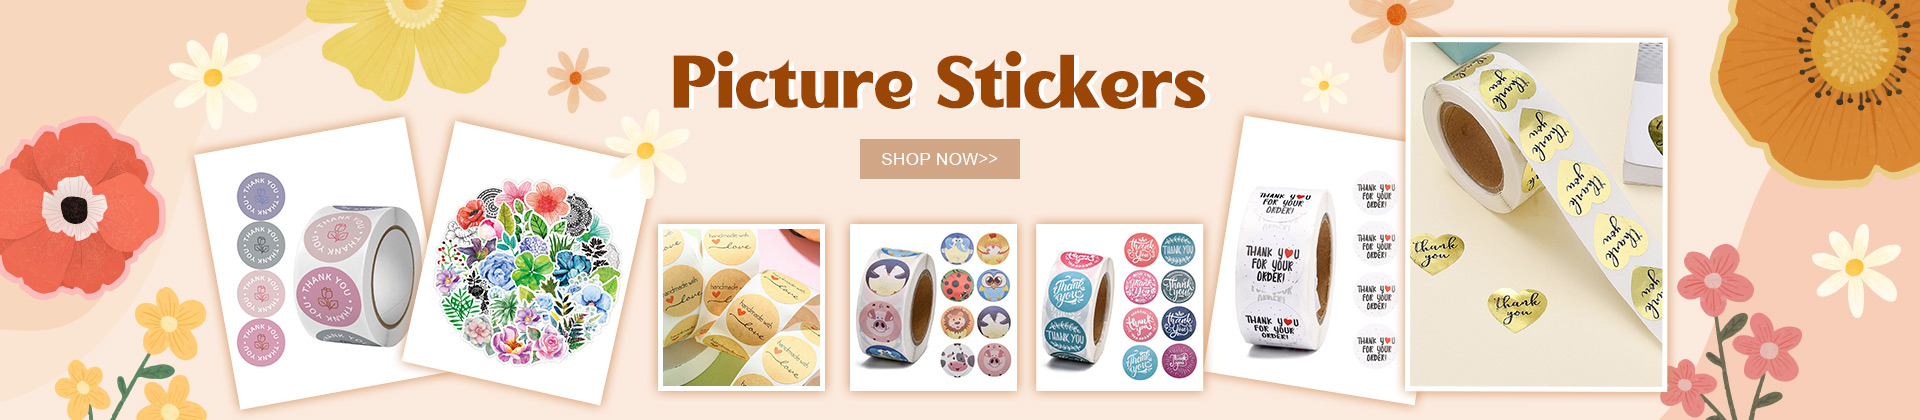 Picture Stickers Shop Now>>